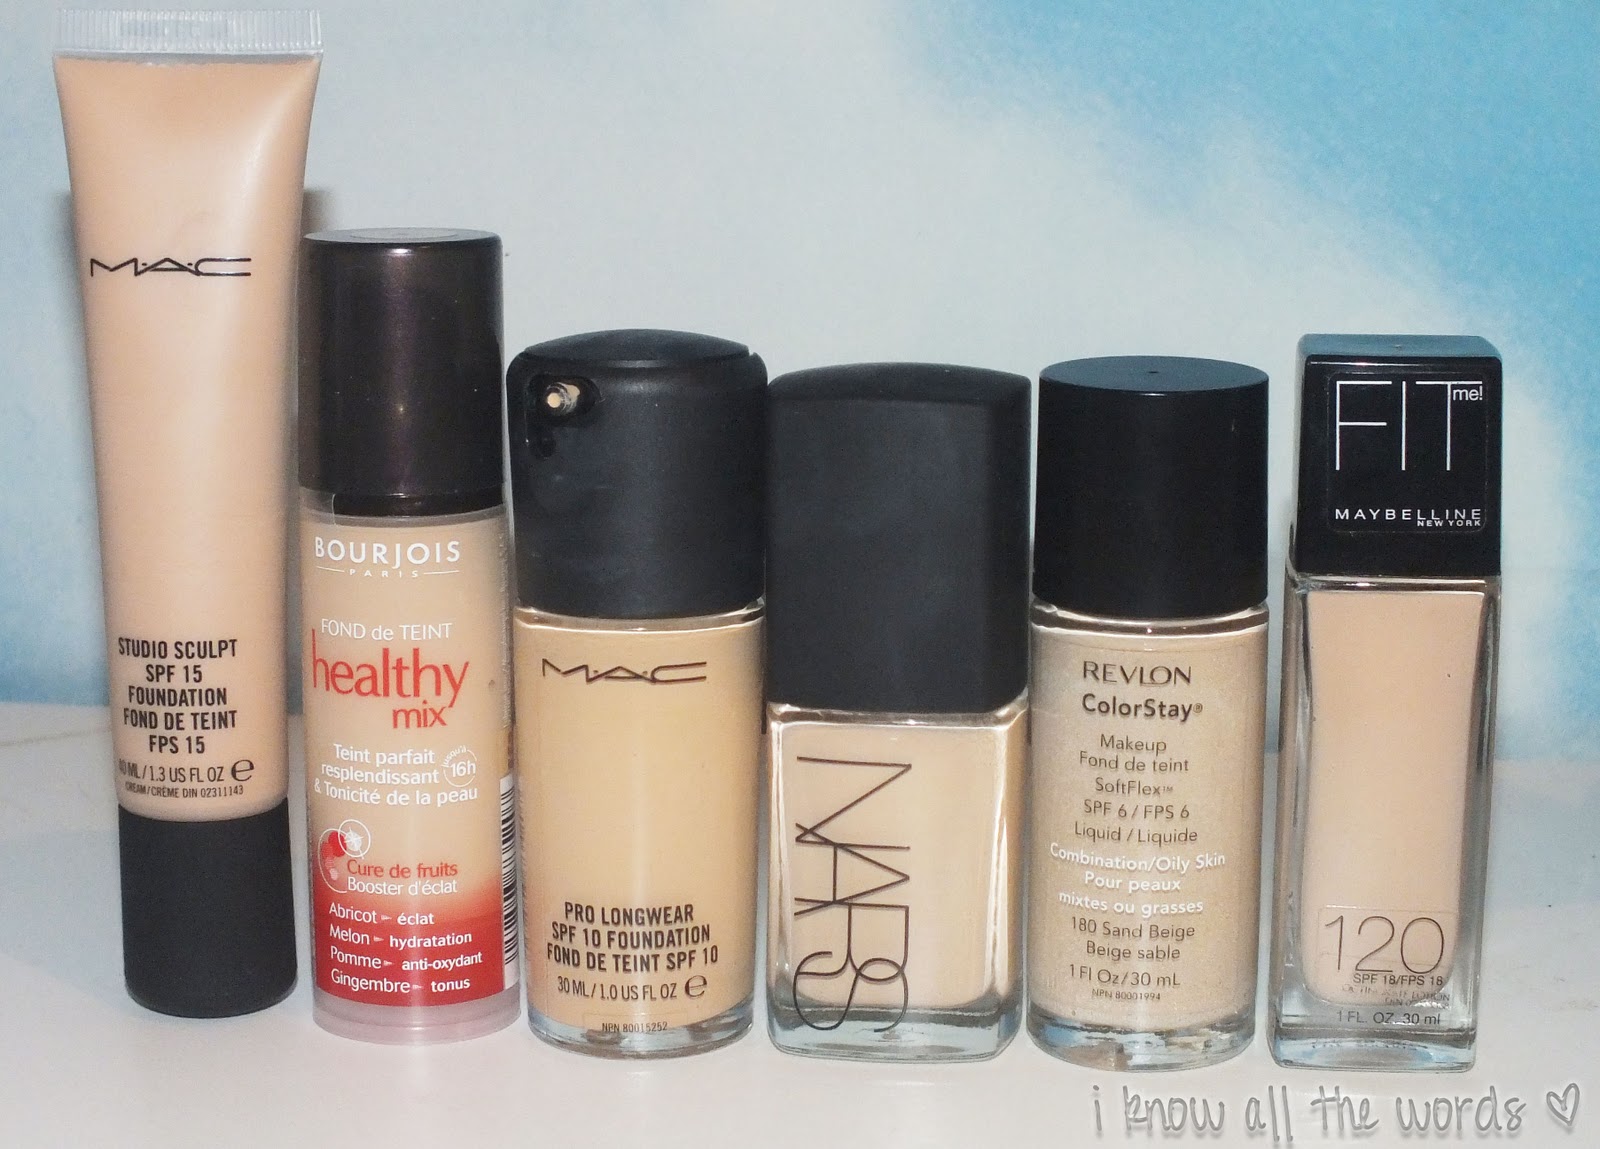 Your existing foundations/concealers